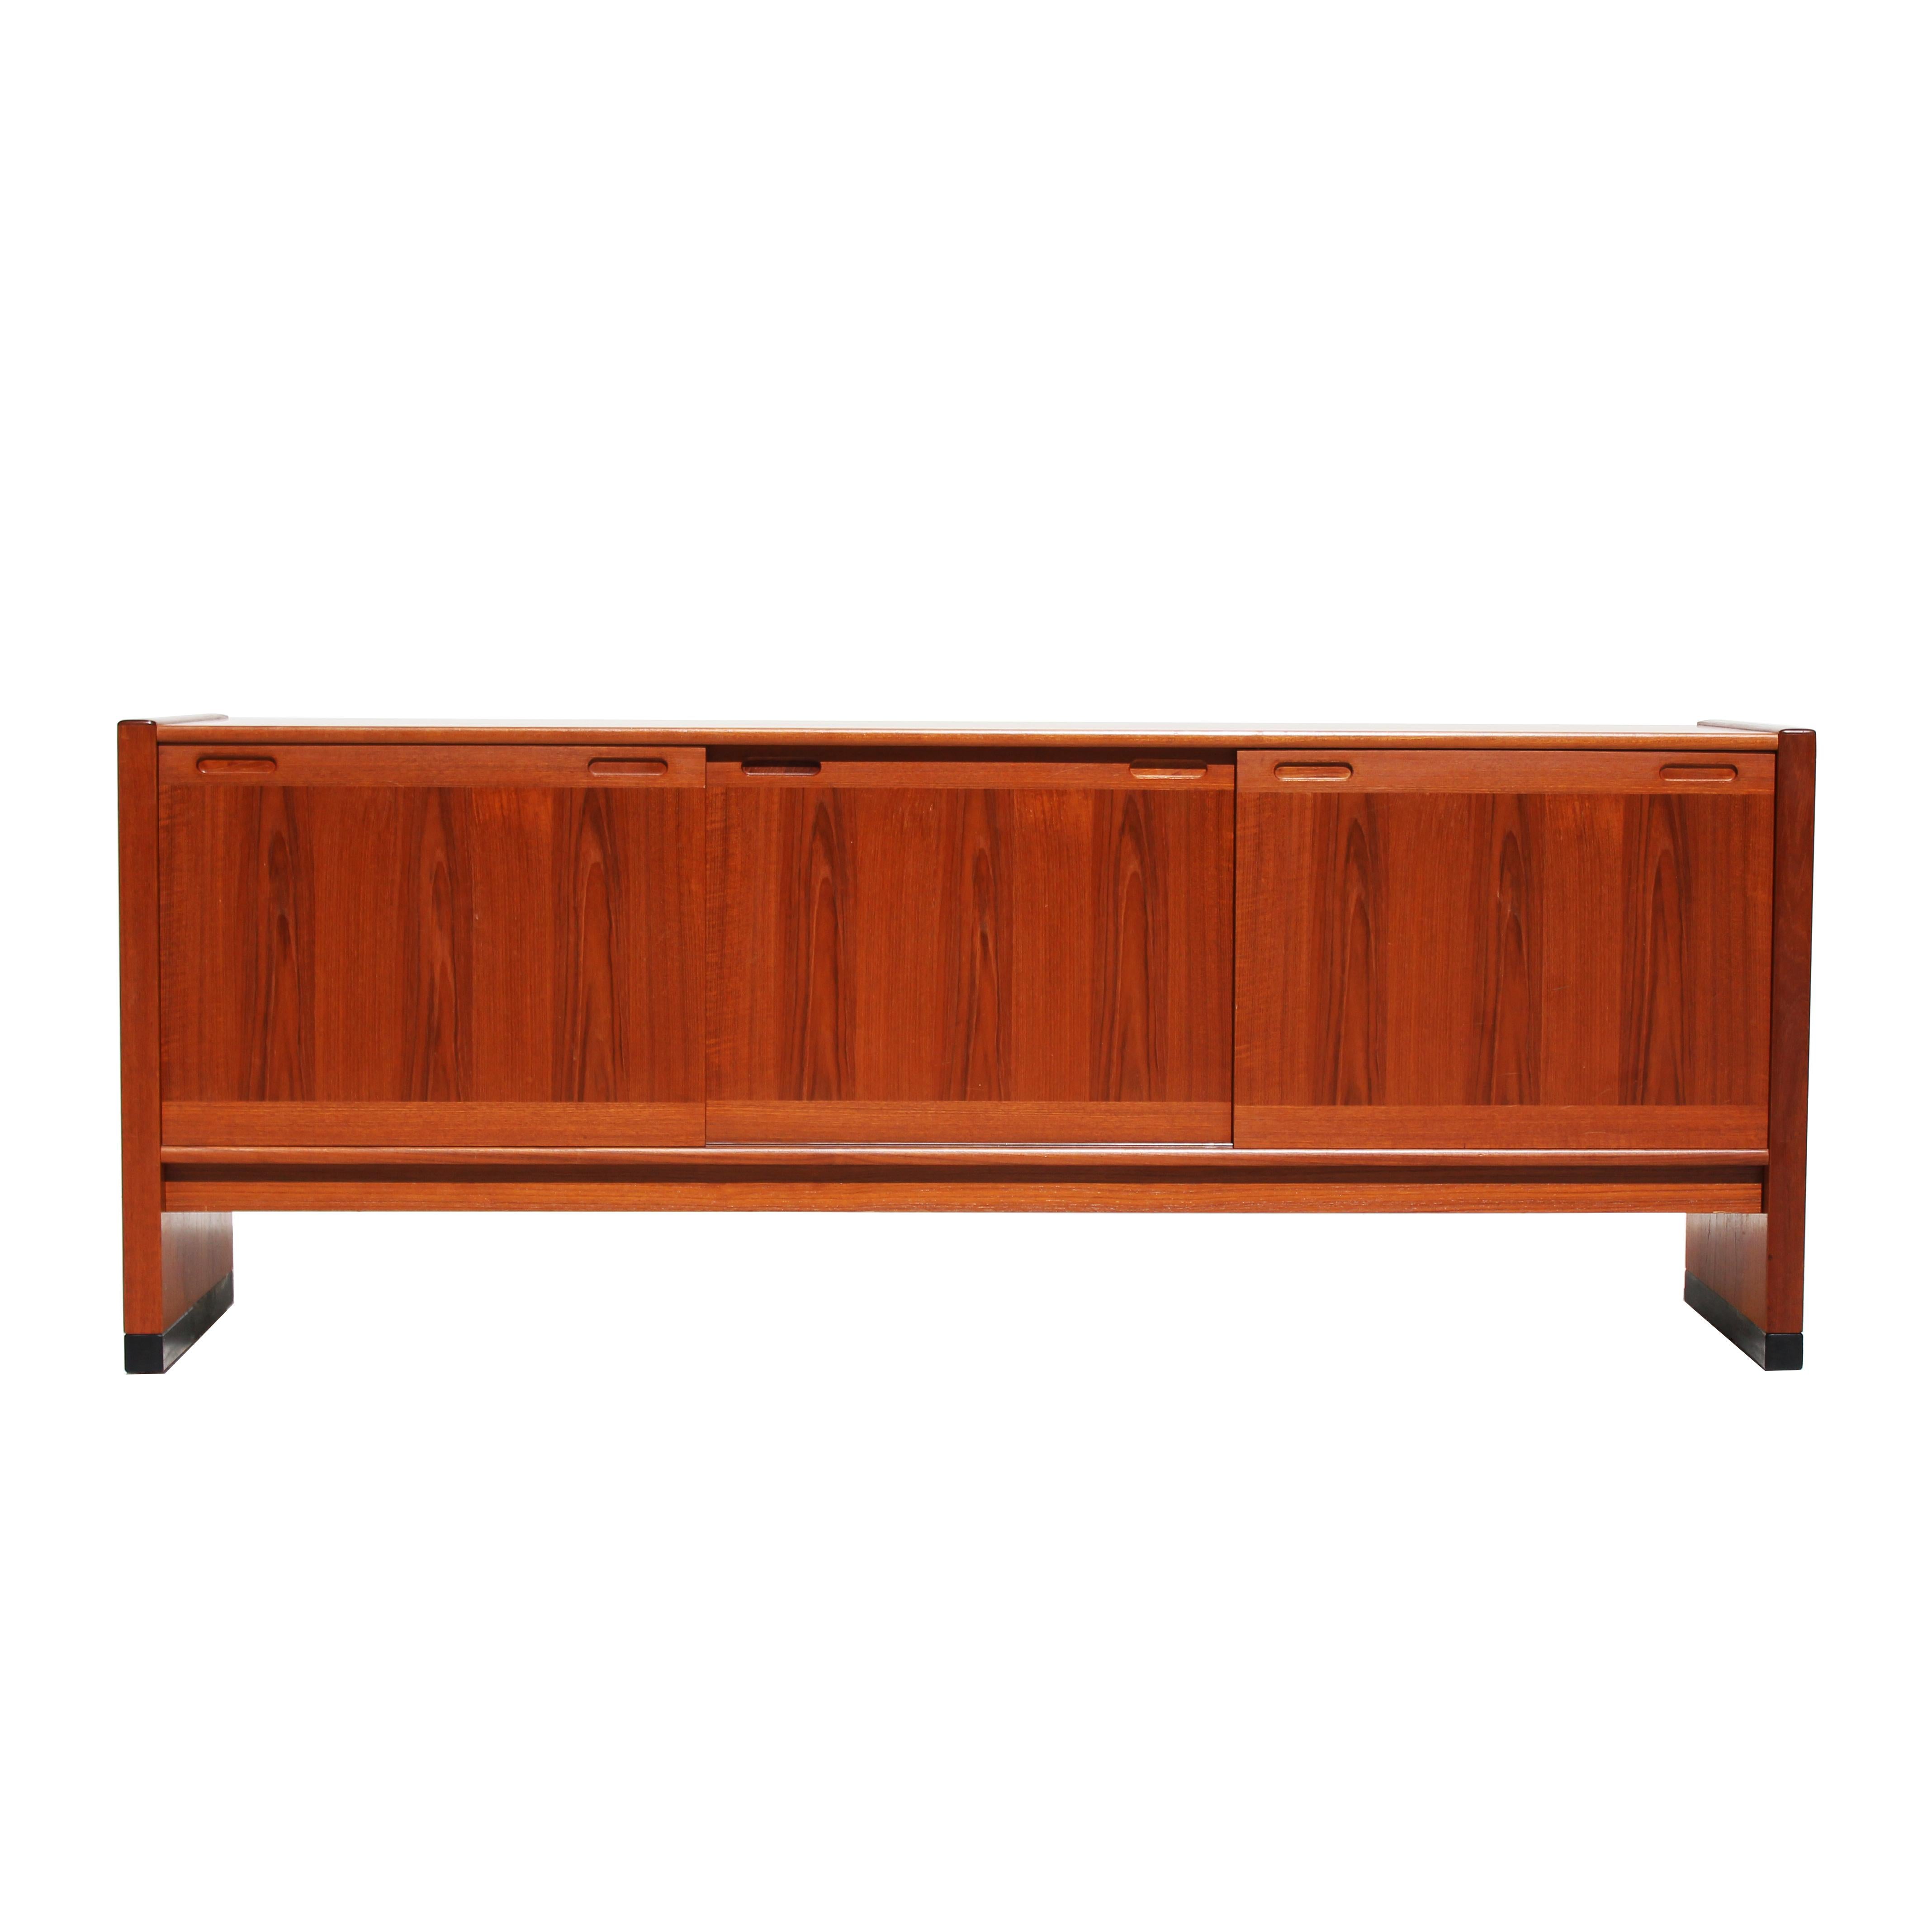 SKovby Rosewood sideboard with three sliding doors. Adjustable shelves and two silverware drawers inside. 

The sideboard is in good condition. However it can be restored professionally to a vintage condition. The piece is restored upon purchase so